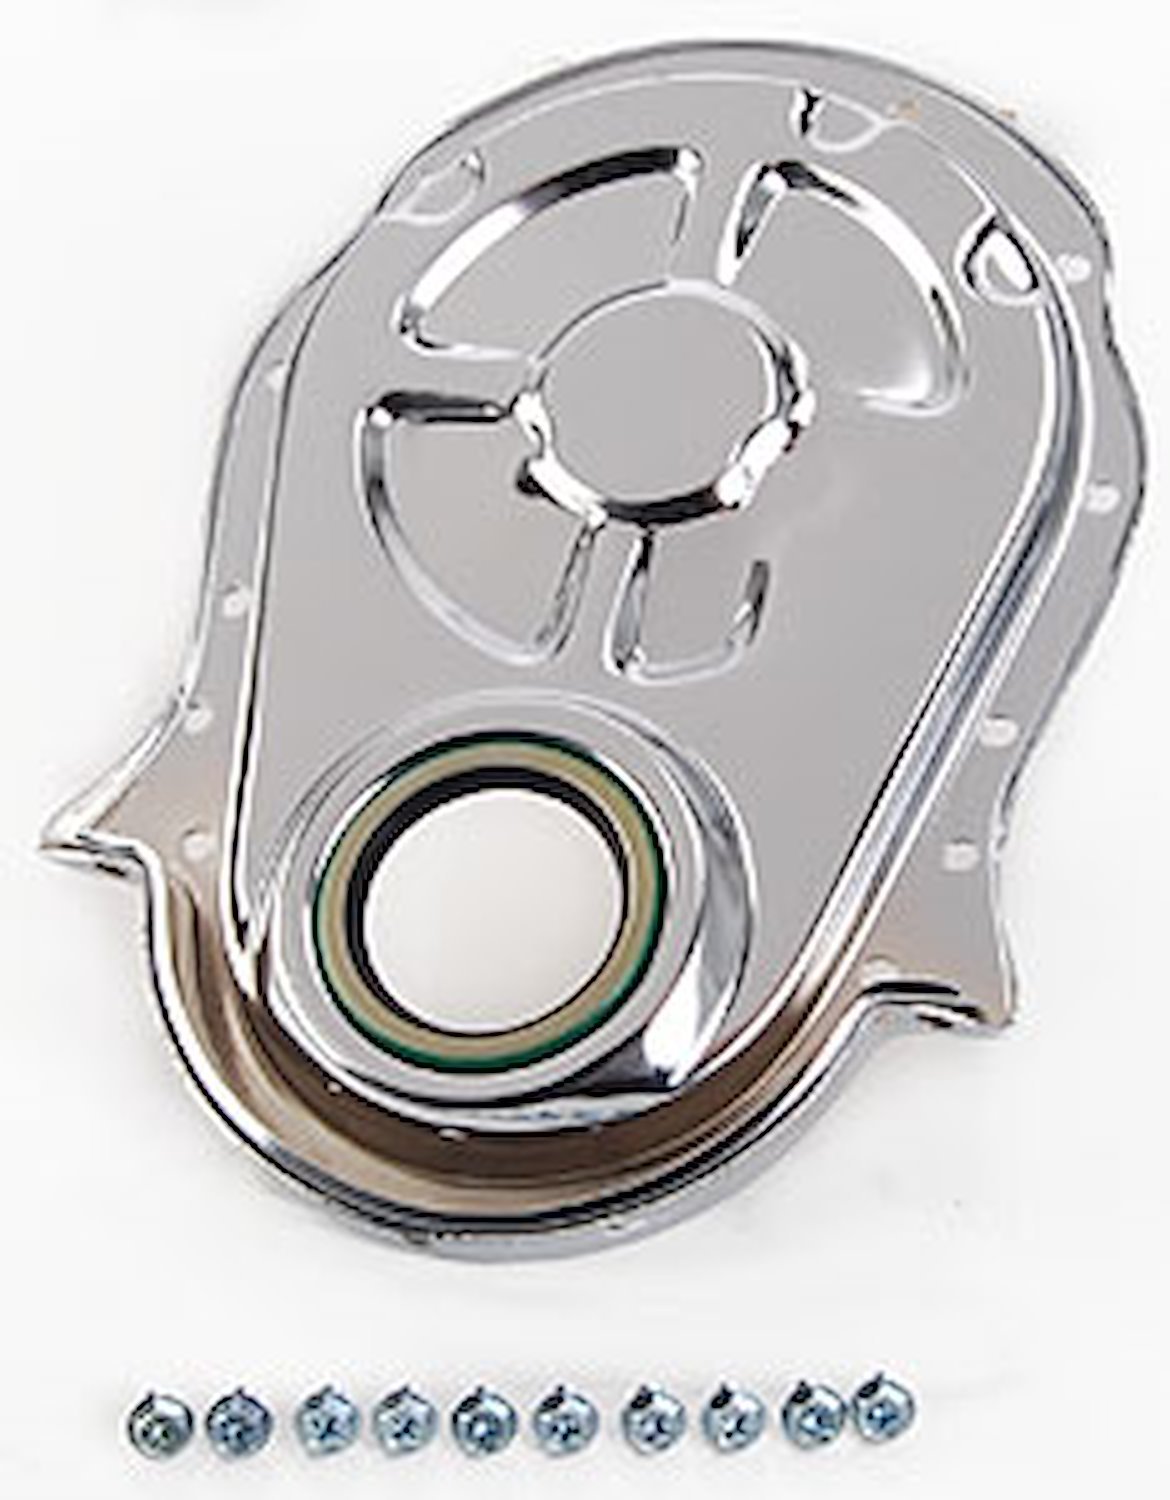 Chrome Timing Chain Cover for 1965-1990 Big Block